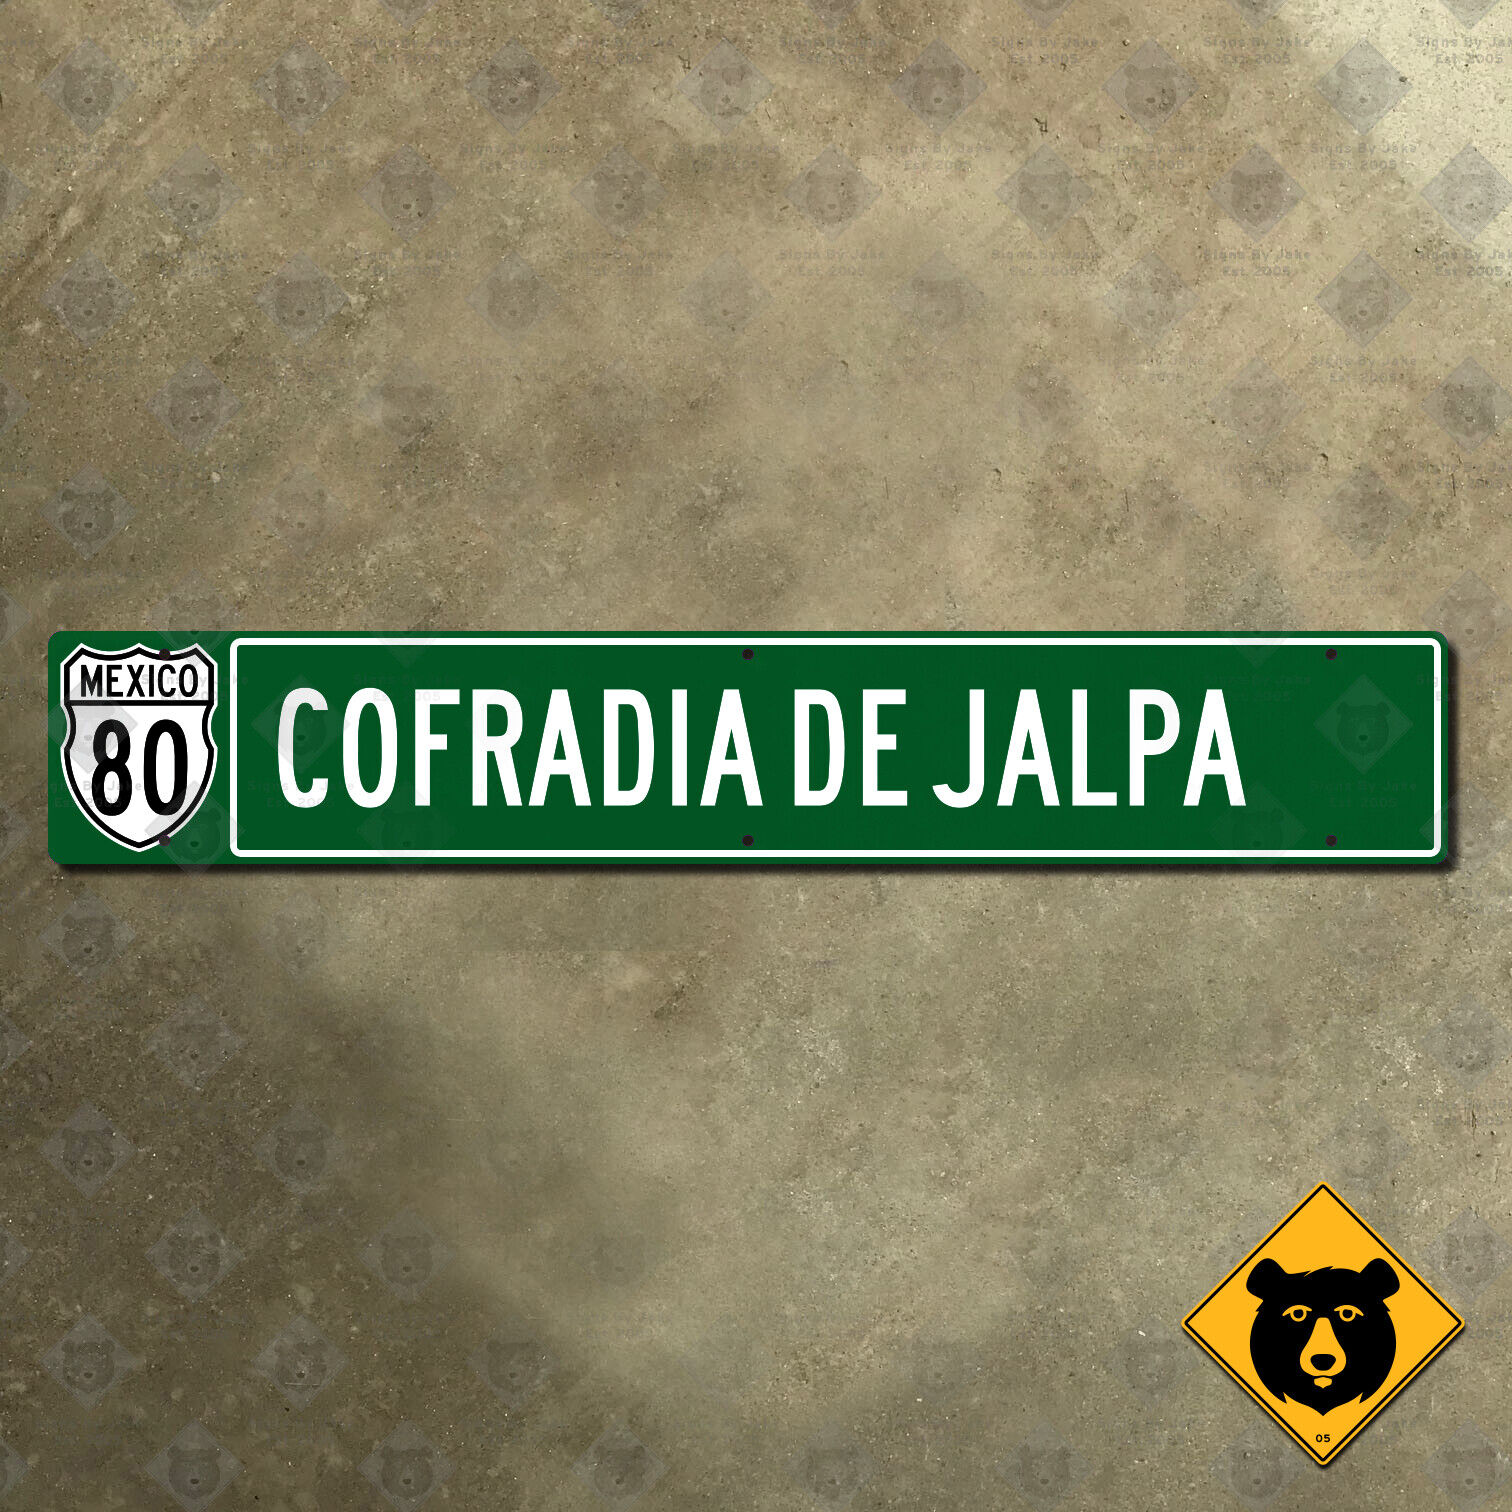 Mexico Federal Highway 80 Cofradia de Jalpa guide road sign marker 1200x200 mm